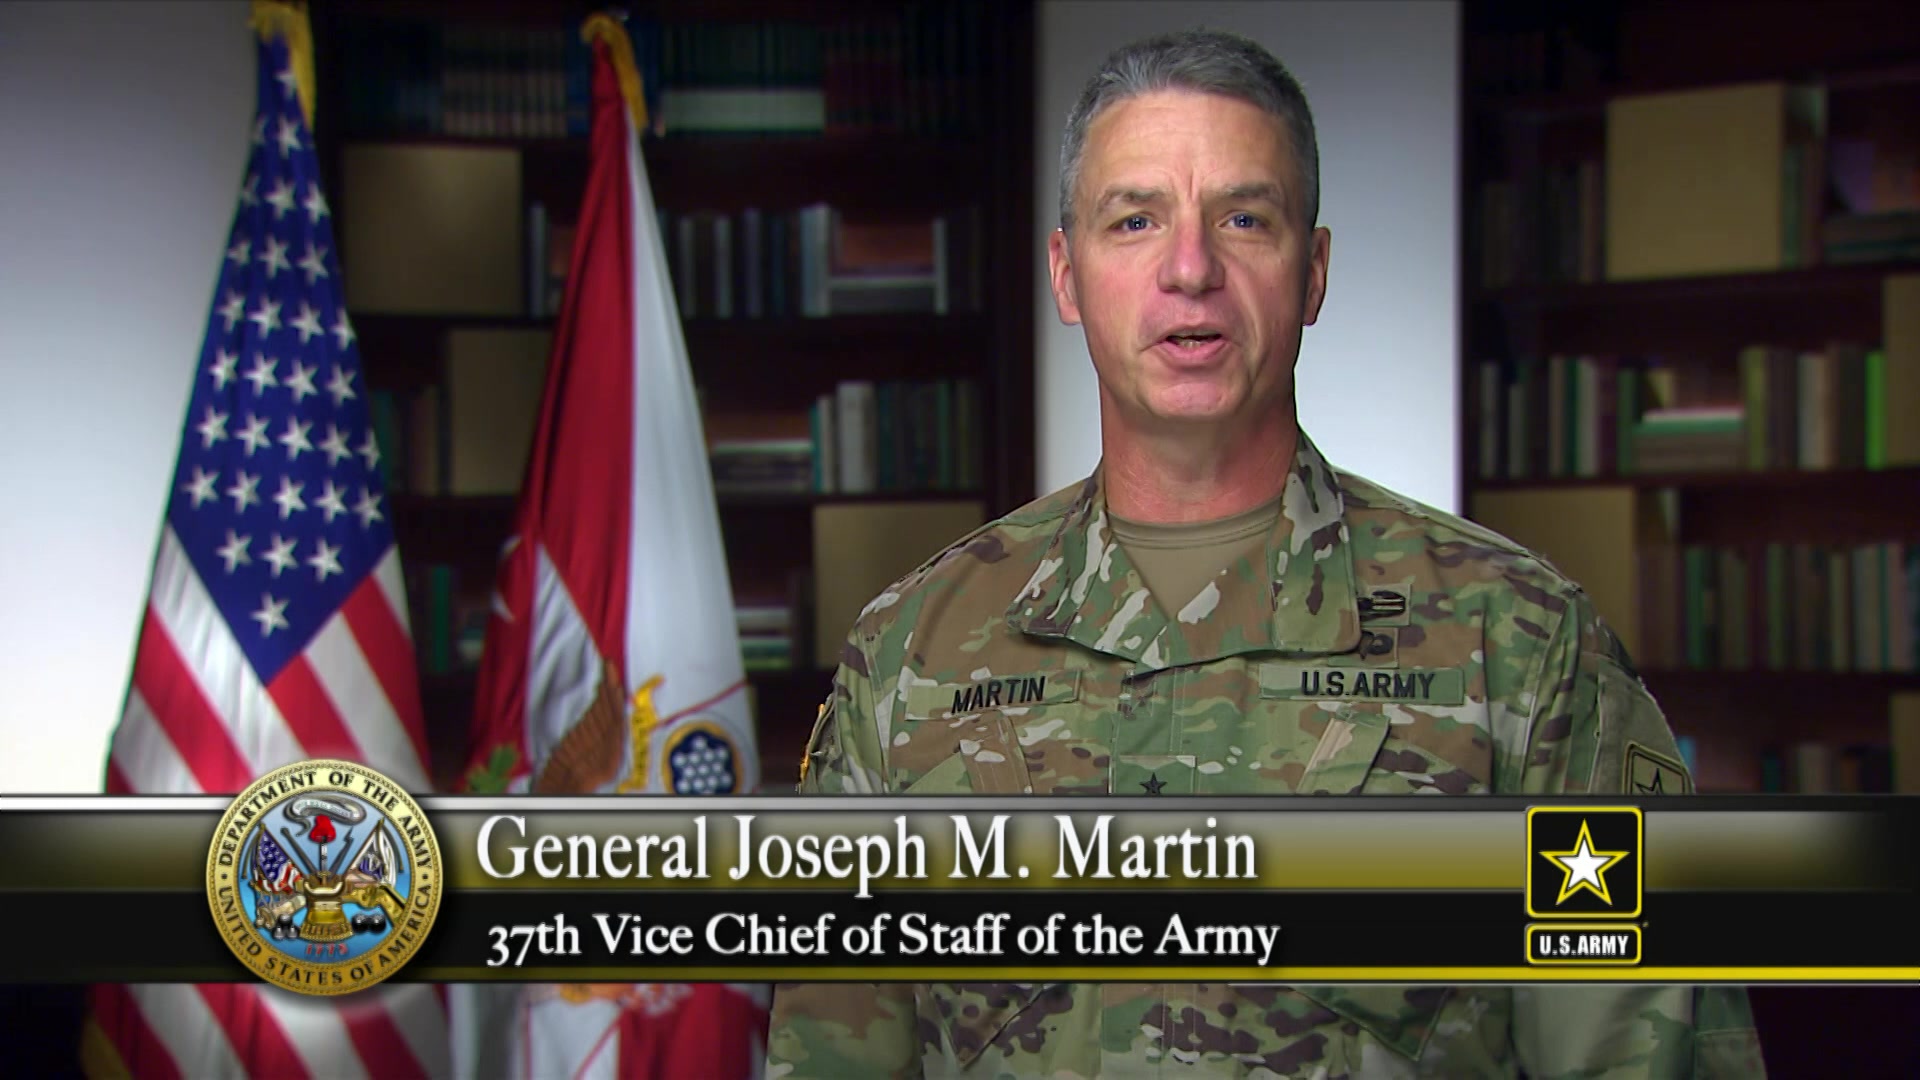 DVIDS - Video - Gen. Joseph M. Martin, U.S. Army Vice Chief of Staff, gives  a shout-out for the U.S. Army Operational Test Command's 50th Birthday